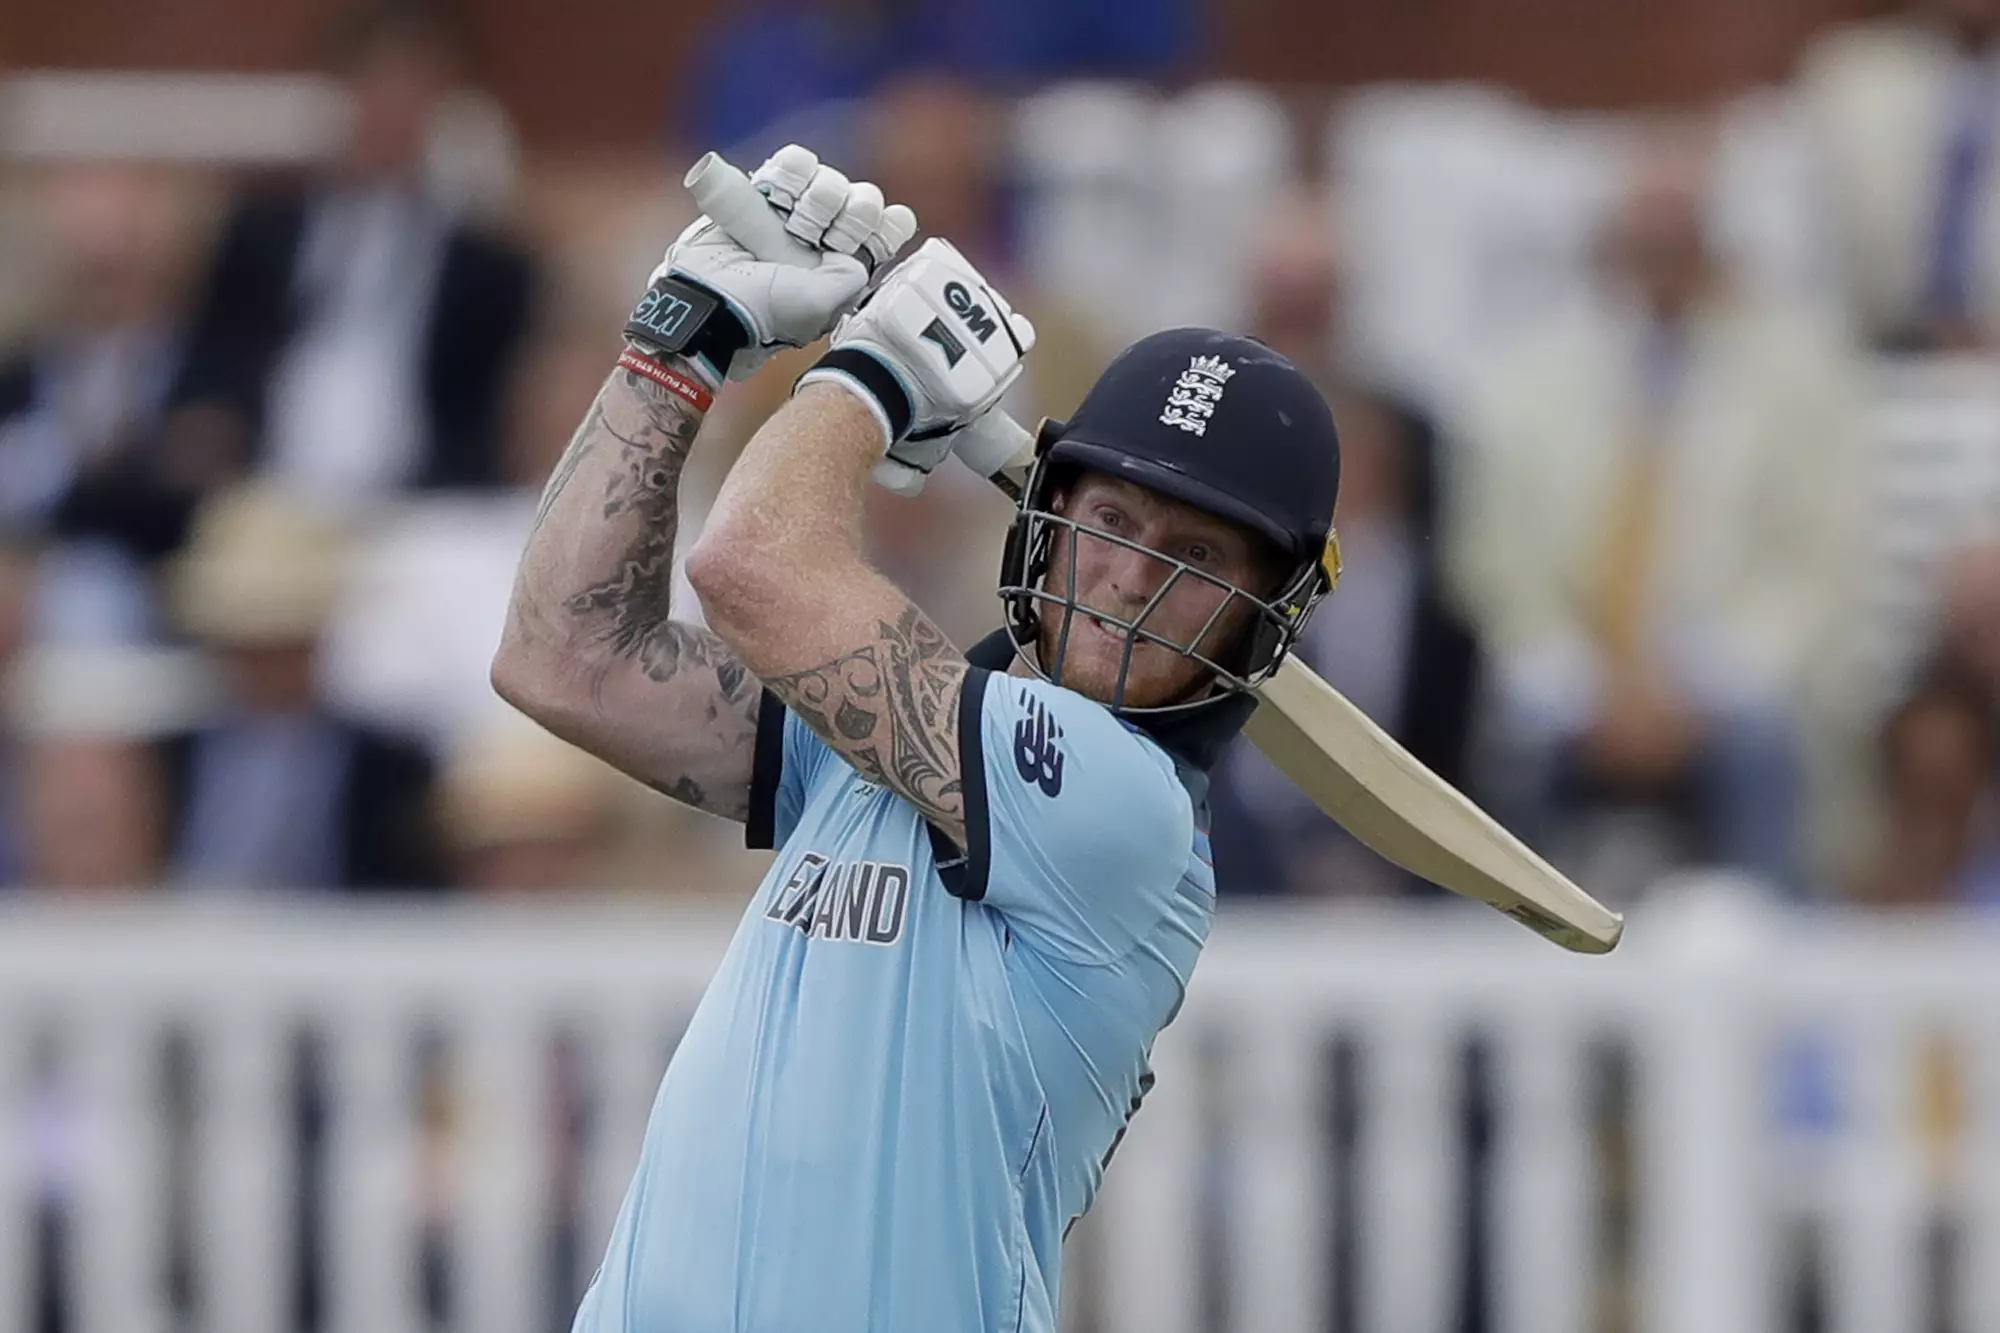 Stokes plays one of his many attacking shots during his innings. Image: PA Images